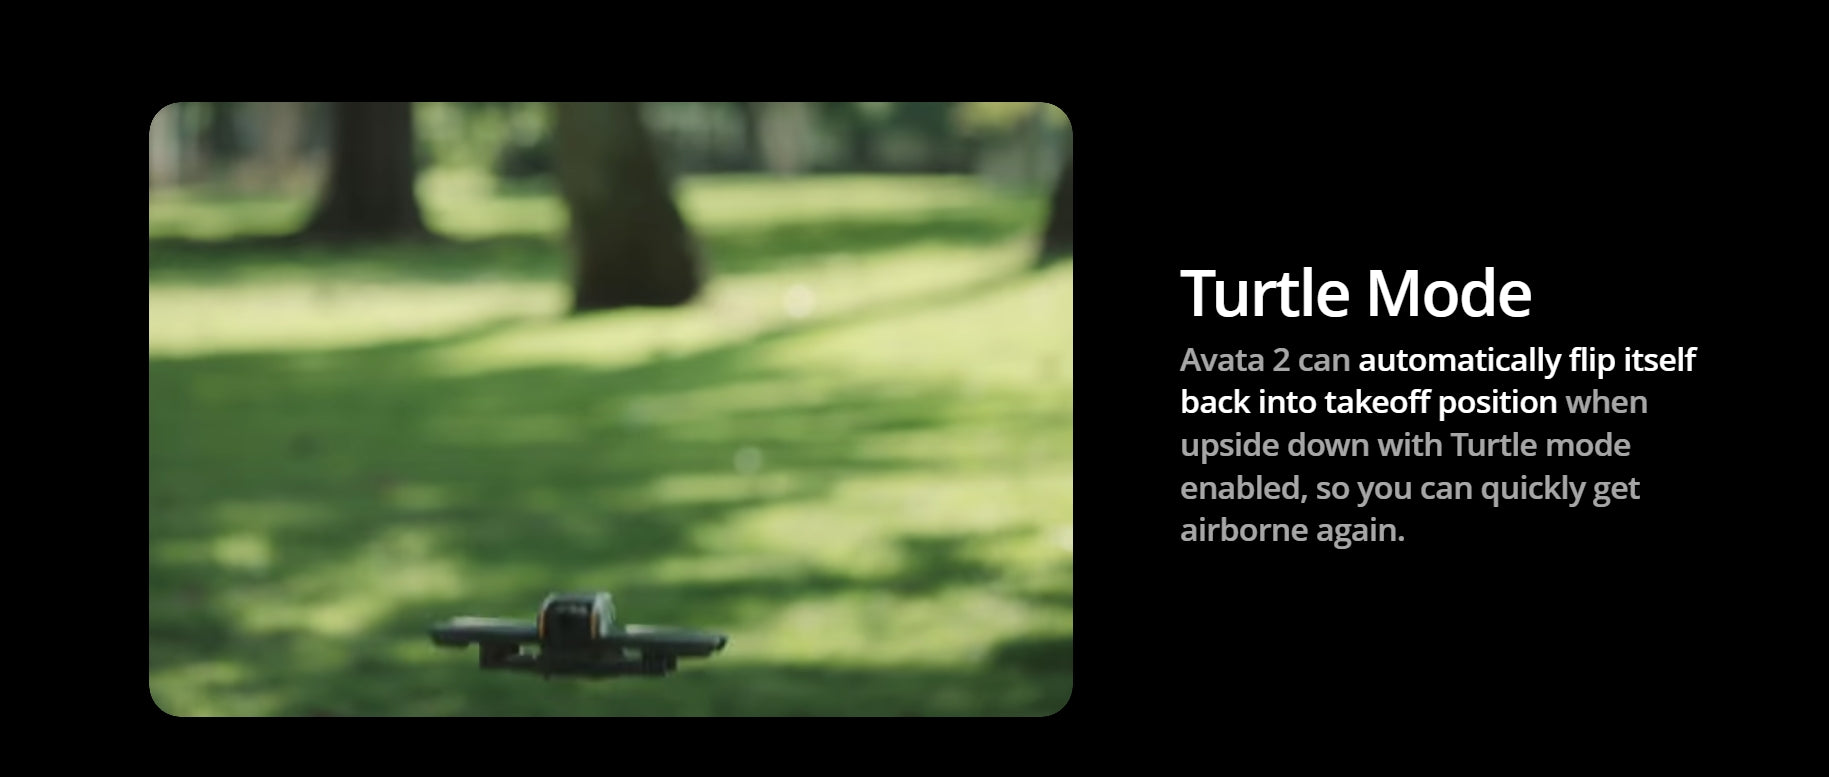 Turtle Mode Avata 2 can automatically flip itself back into takeoff position when upside down